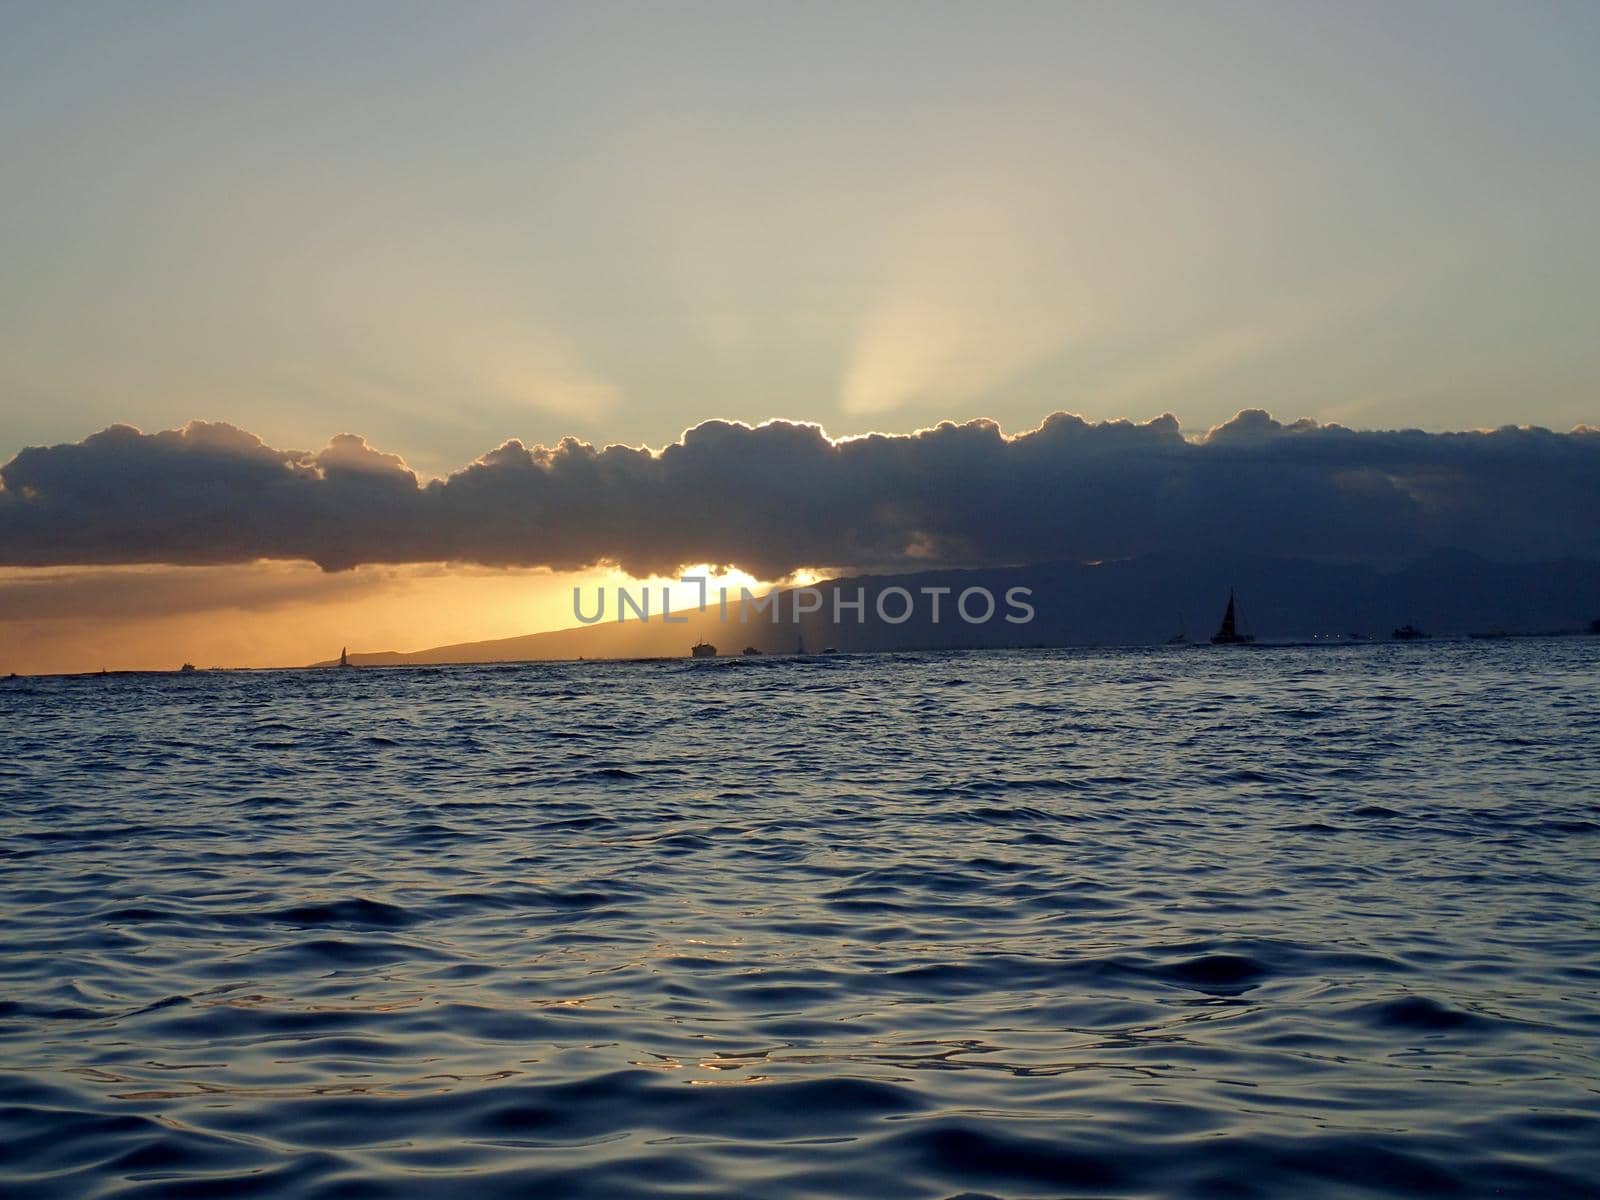 Sunsets through the clouds over Waianae mountains with light reflecting on ocean and illuminating the sky with boats sailing on the water off Waikiki on Oahu, Hawaii.